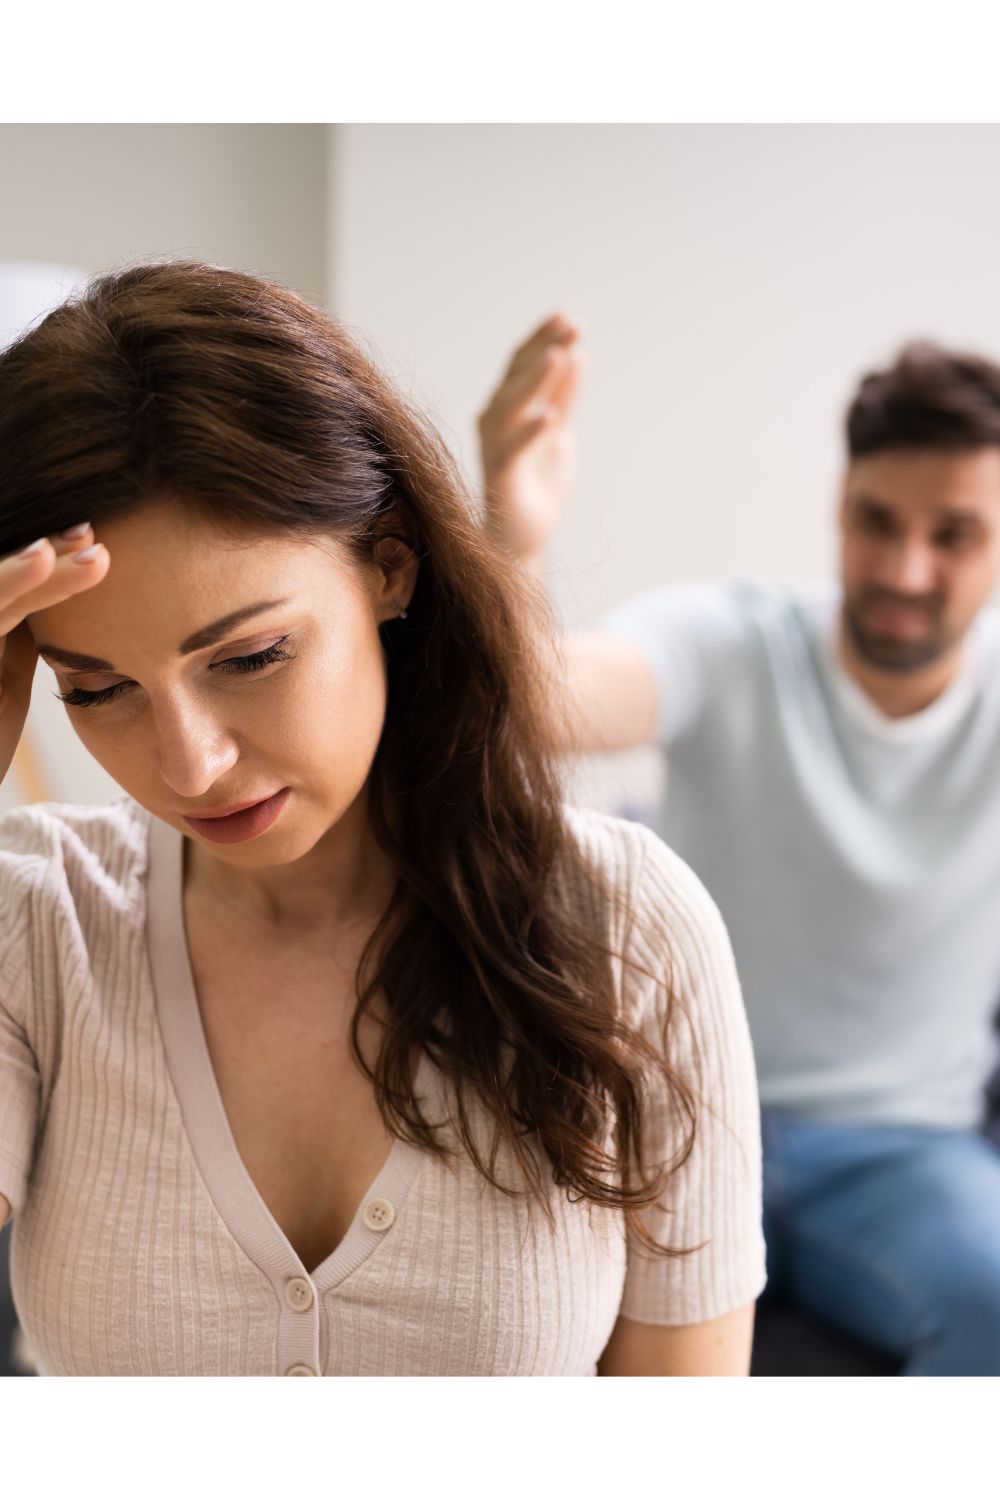 7 Things a Married Man Should Never Say to His Wife

